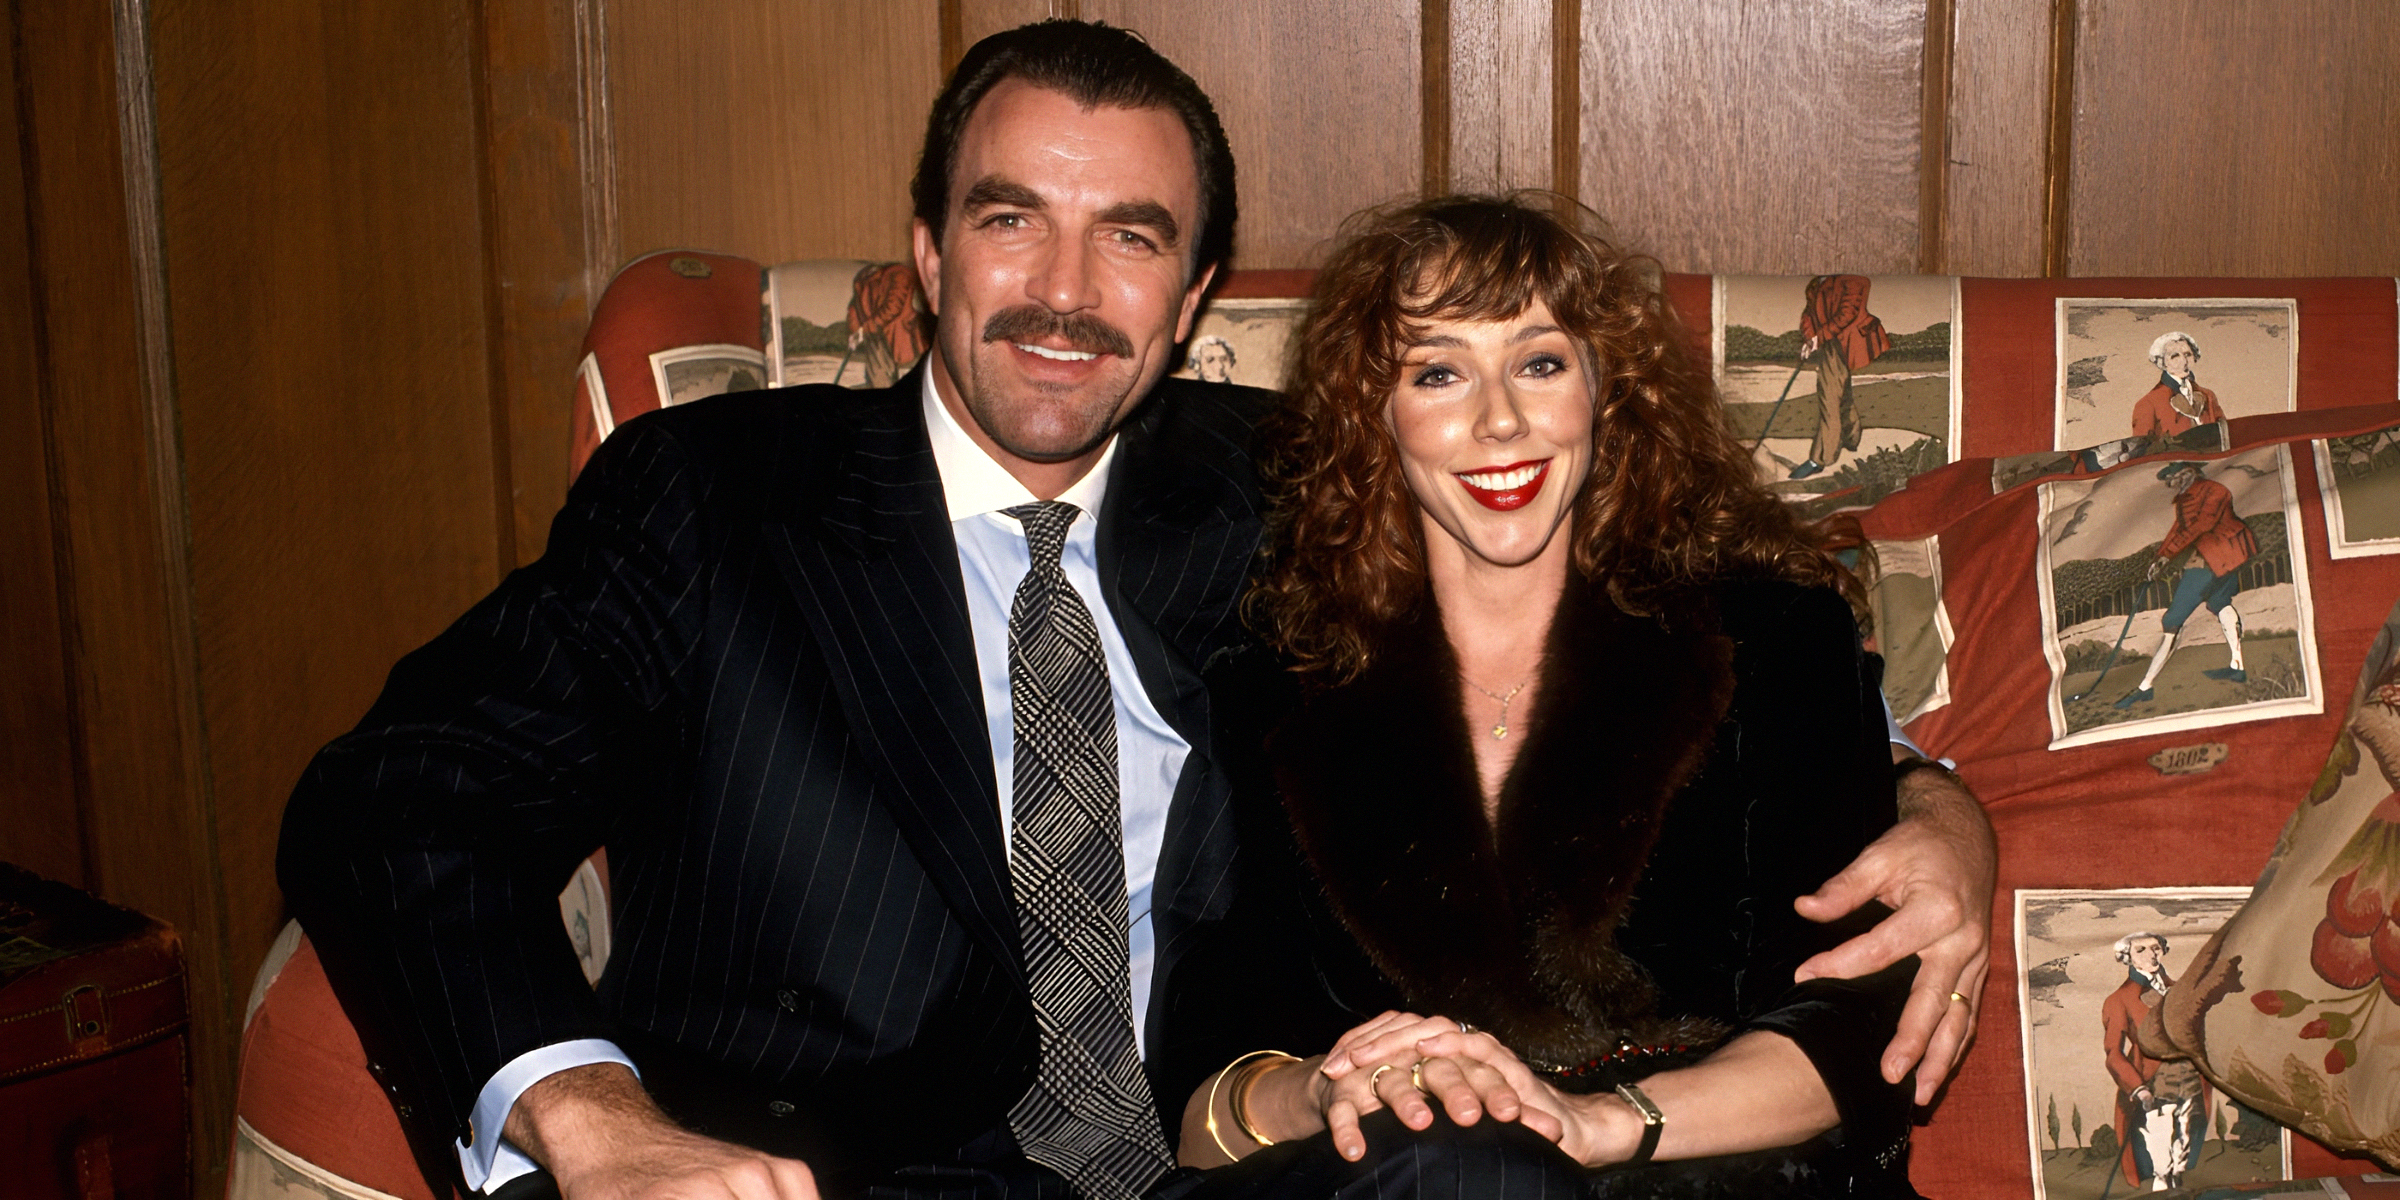 Tom Selleck and Jillie Mack | Source: Getty Images